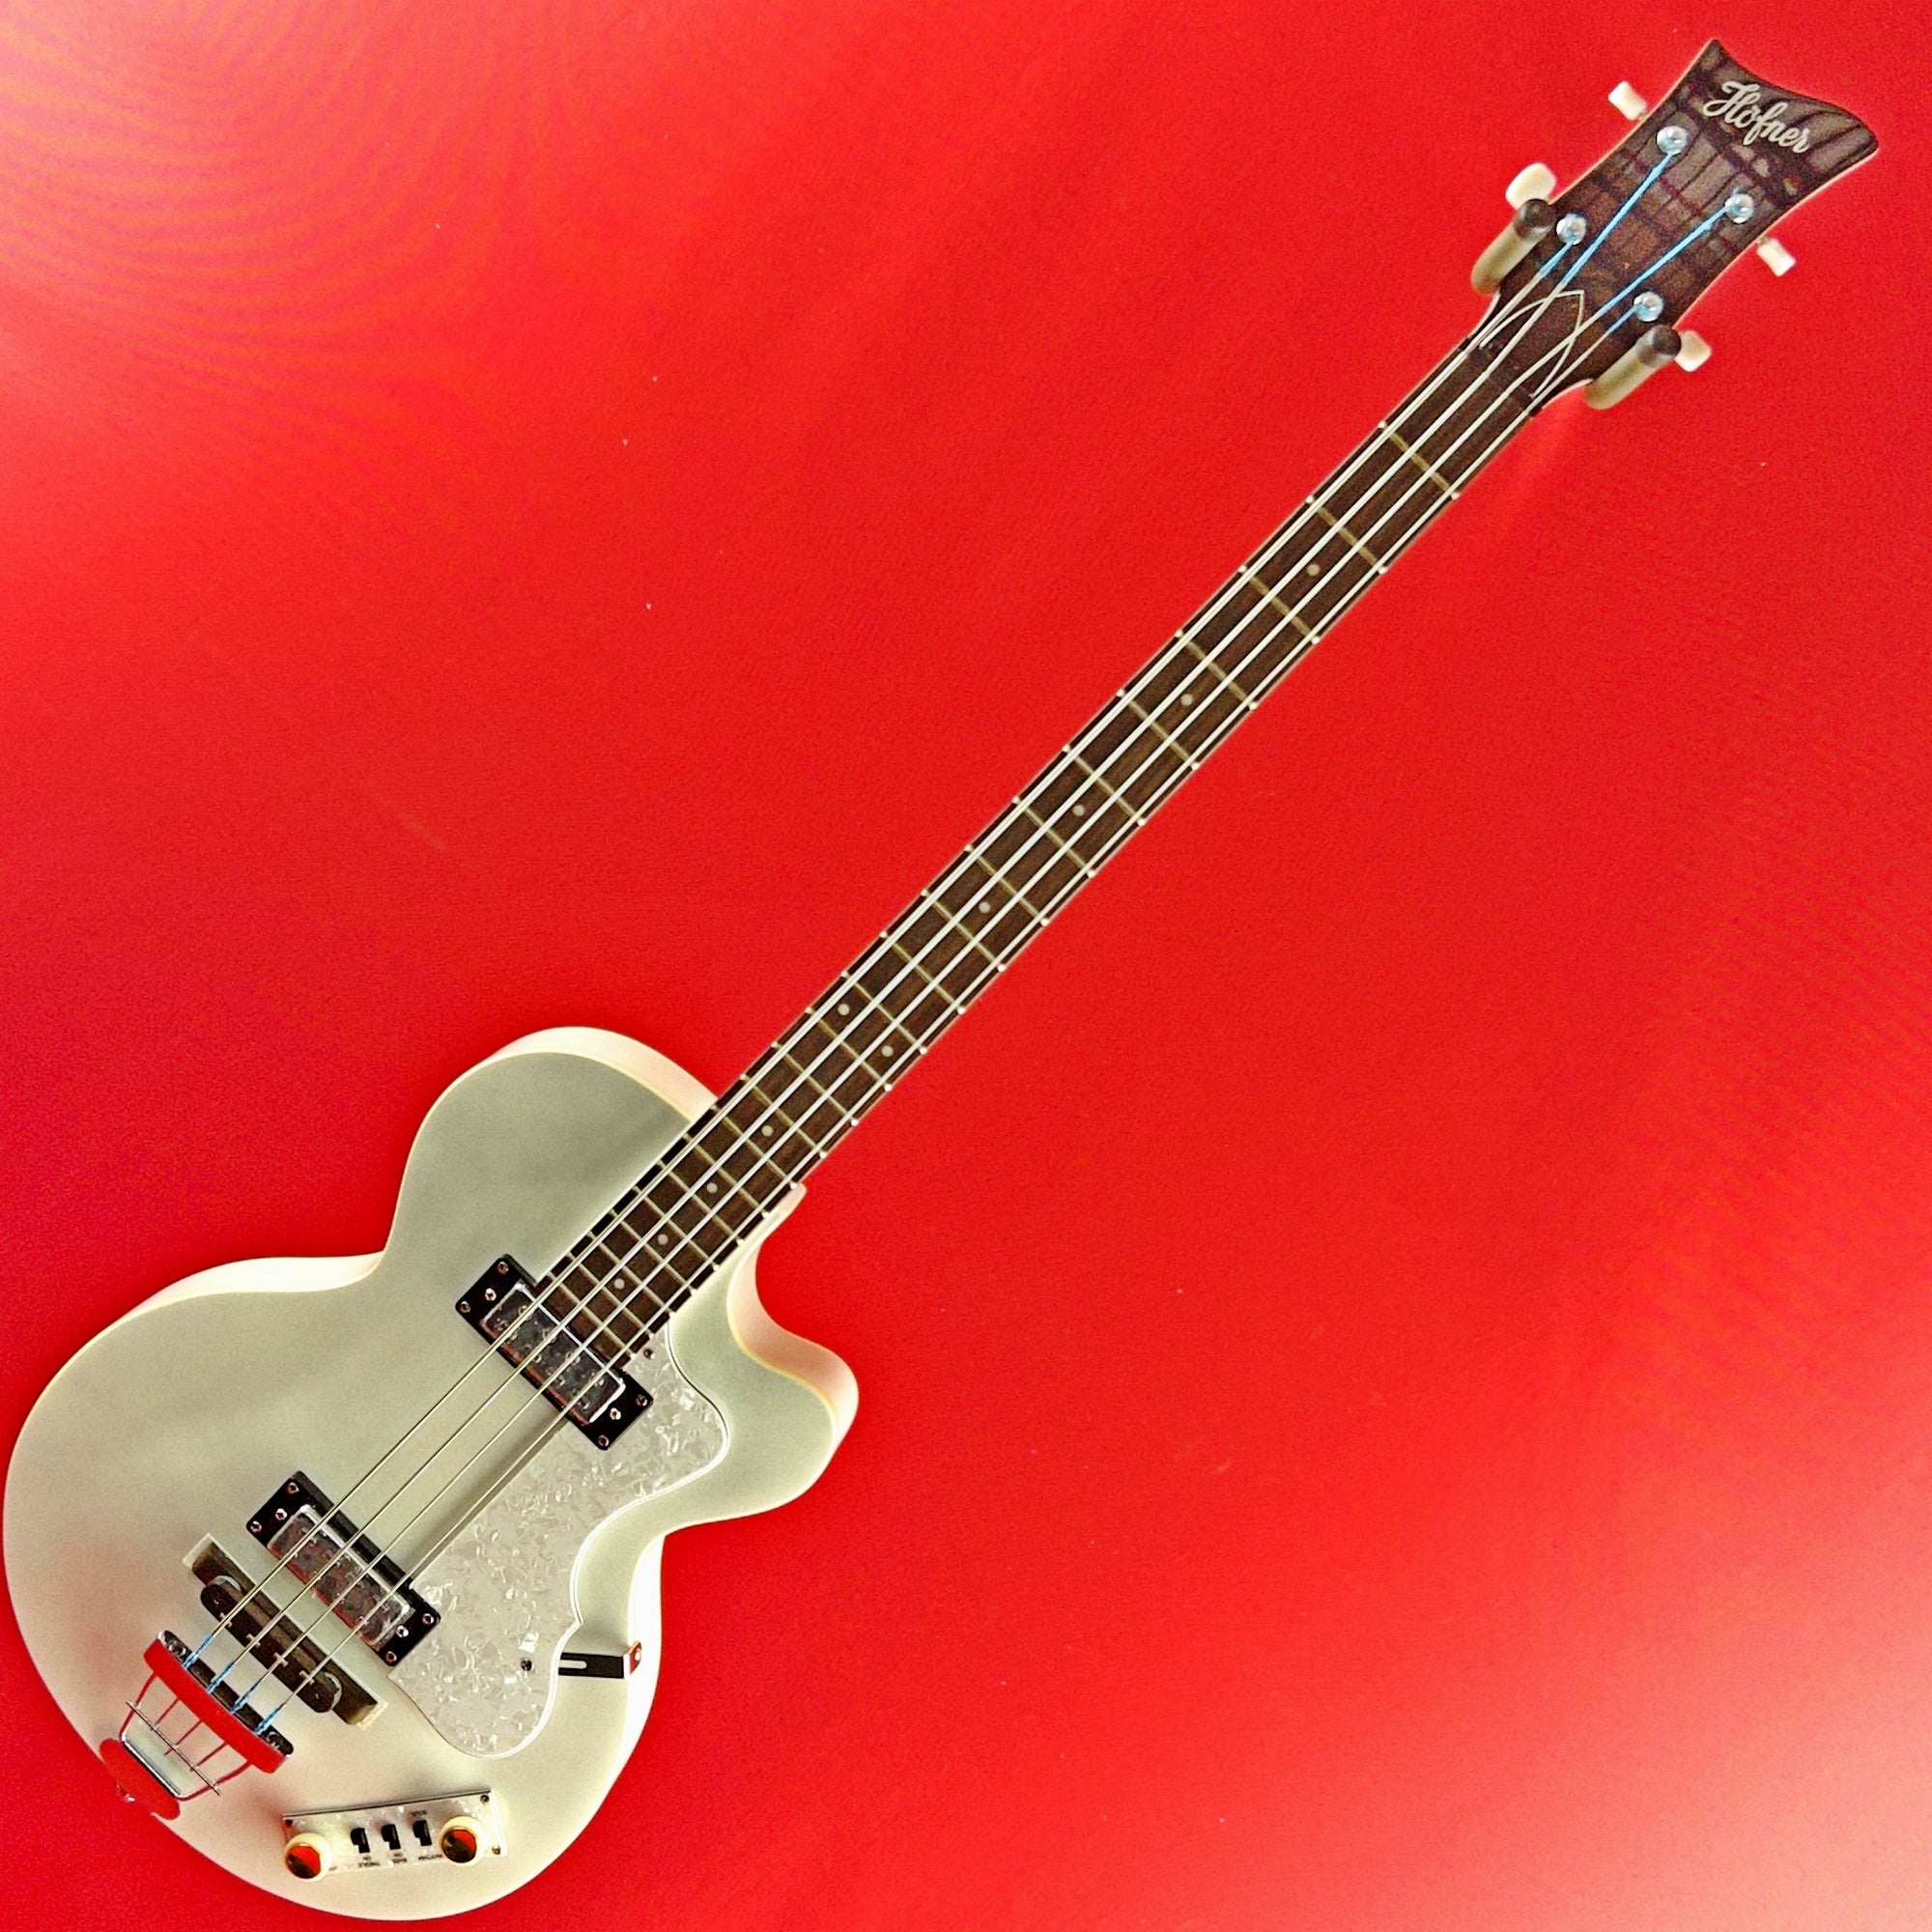 [USED] Hofner HI-CB-PE-PW Ignition Pro Club Bass, Pearl White (See Description)